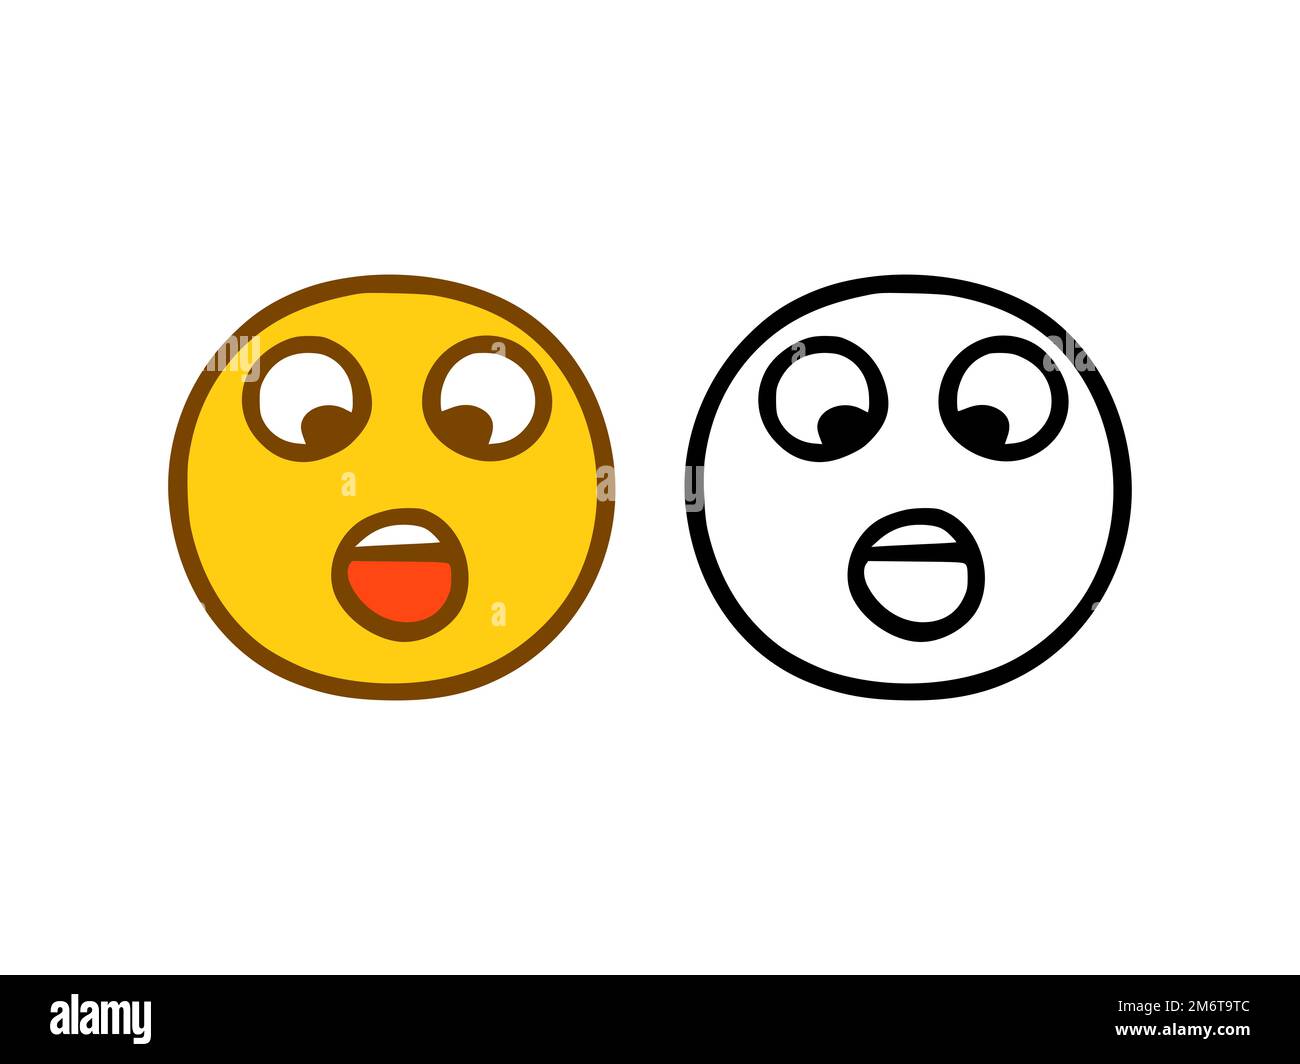 Silly face emoticon in doodle style isolated on white background Stock Photo